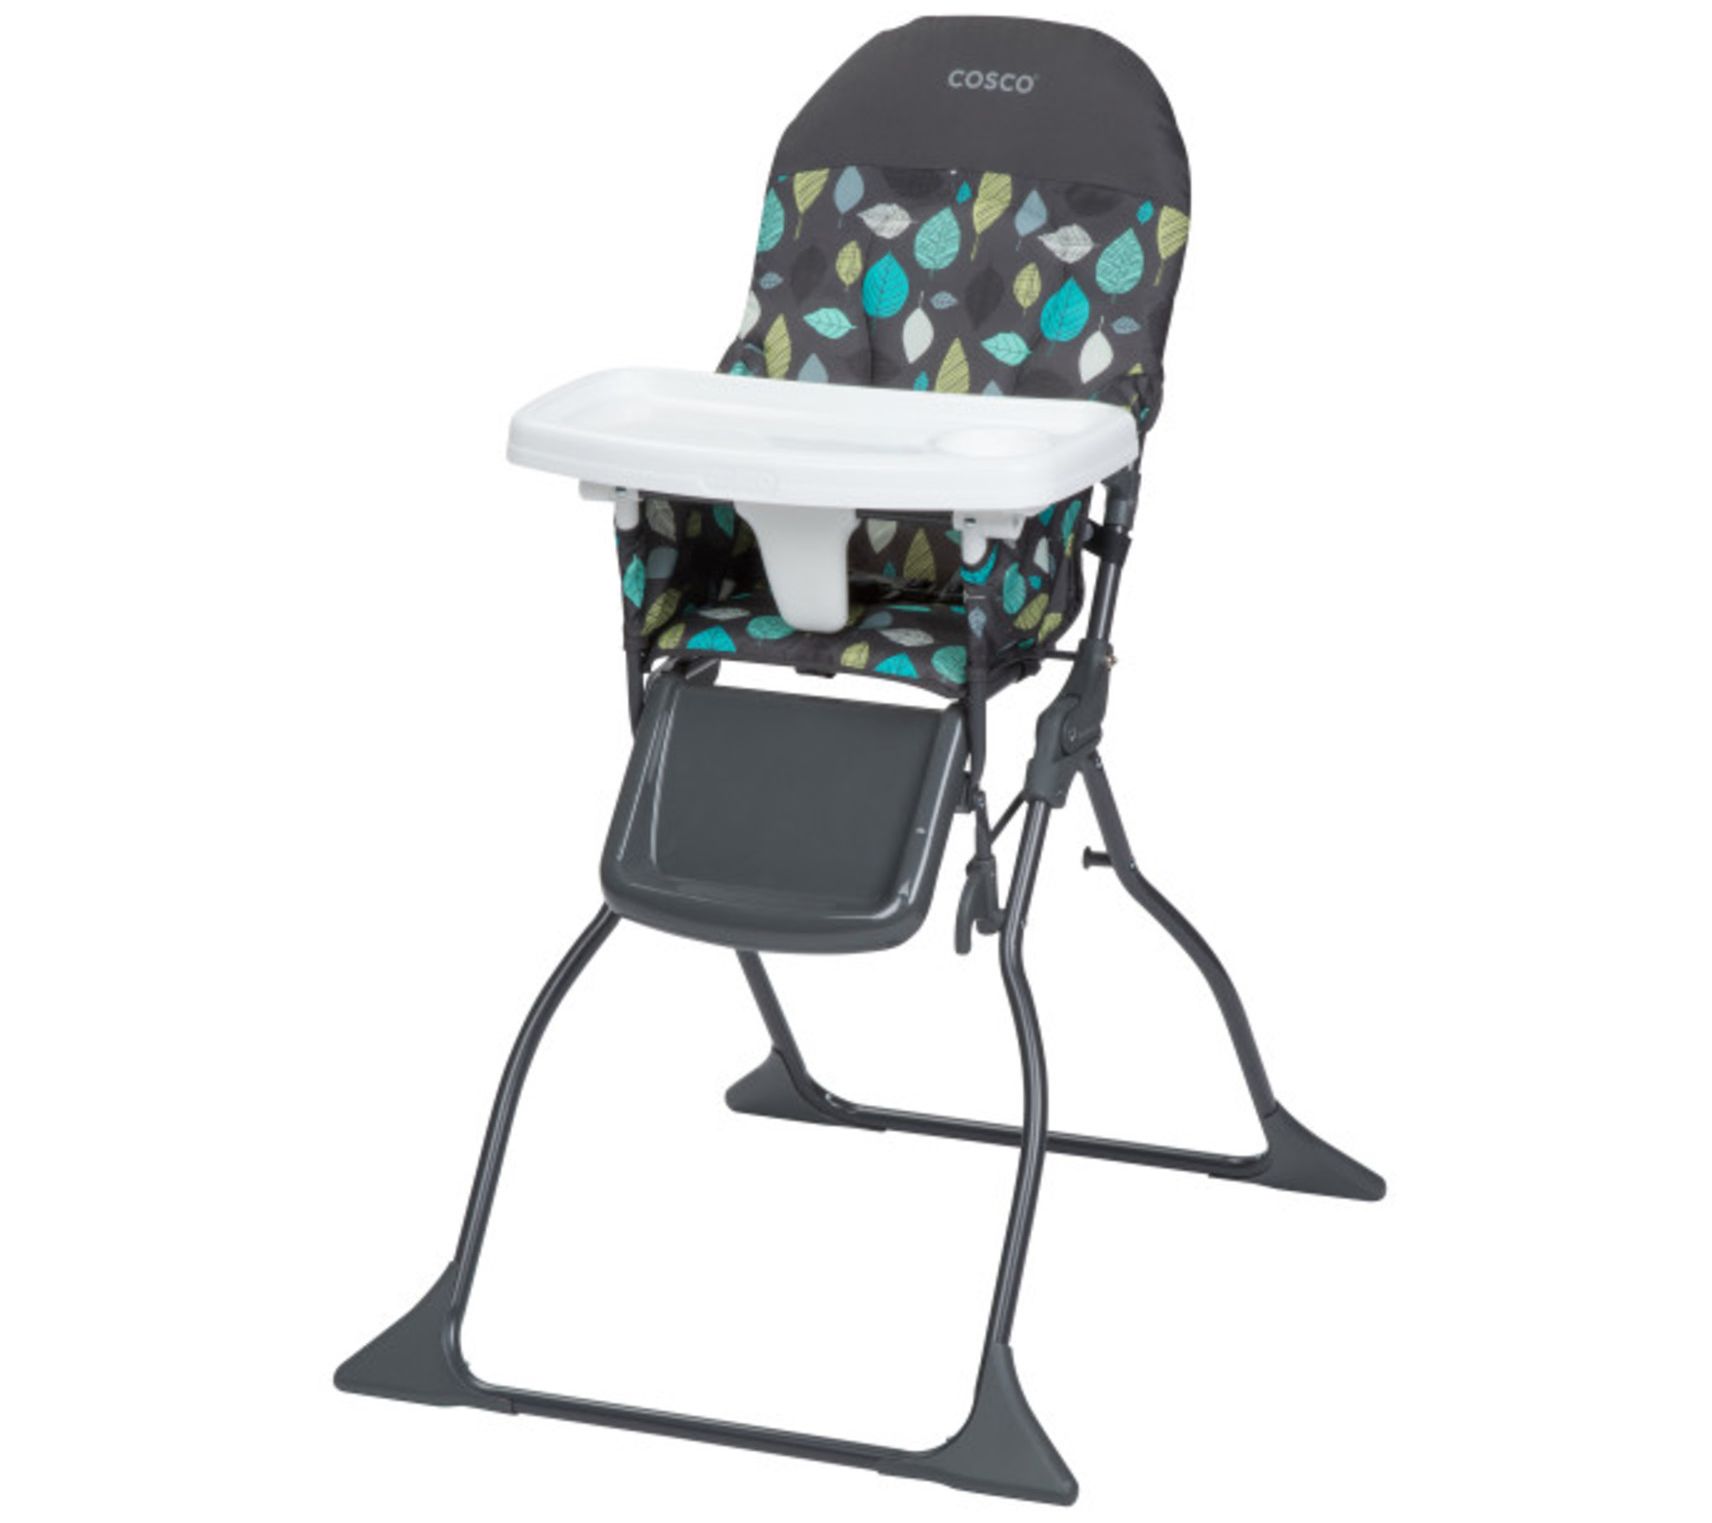 COSCO SIMPLE FOLD HIGH CHAIR 3-position Adjustable Tray Multiple Colors 